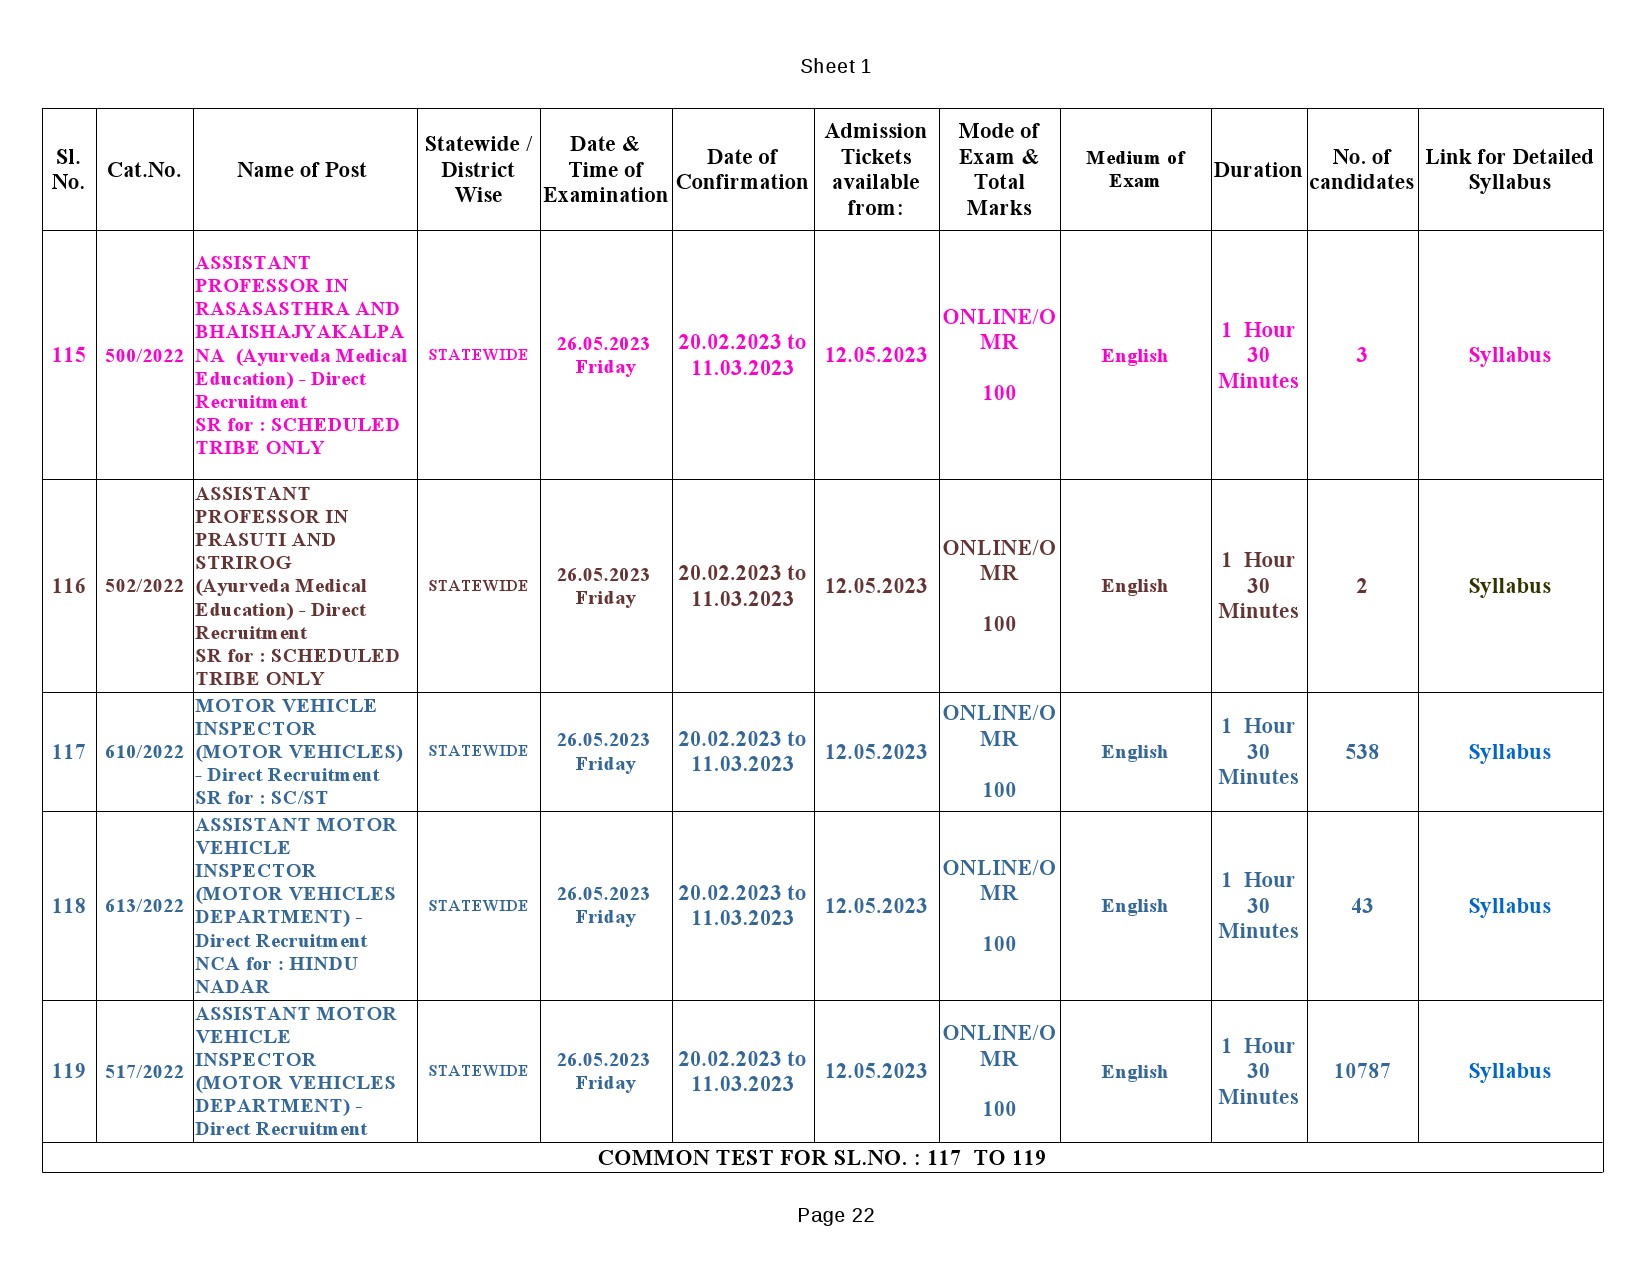 Modified Examination Programme For The Month Of May 2023 - Notification Image 22